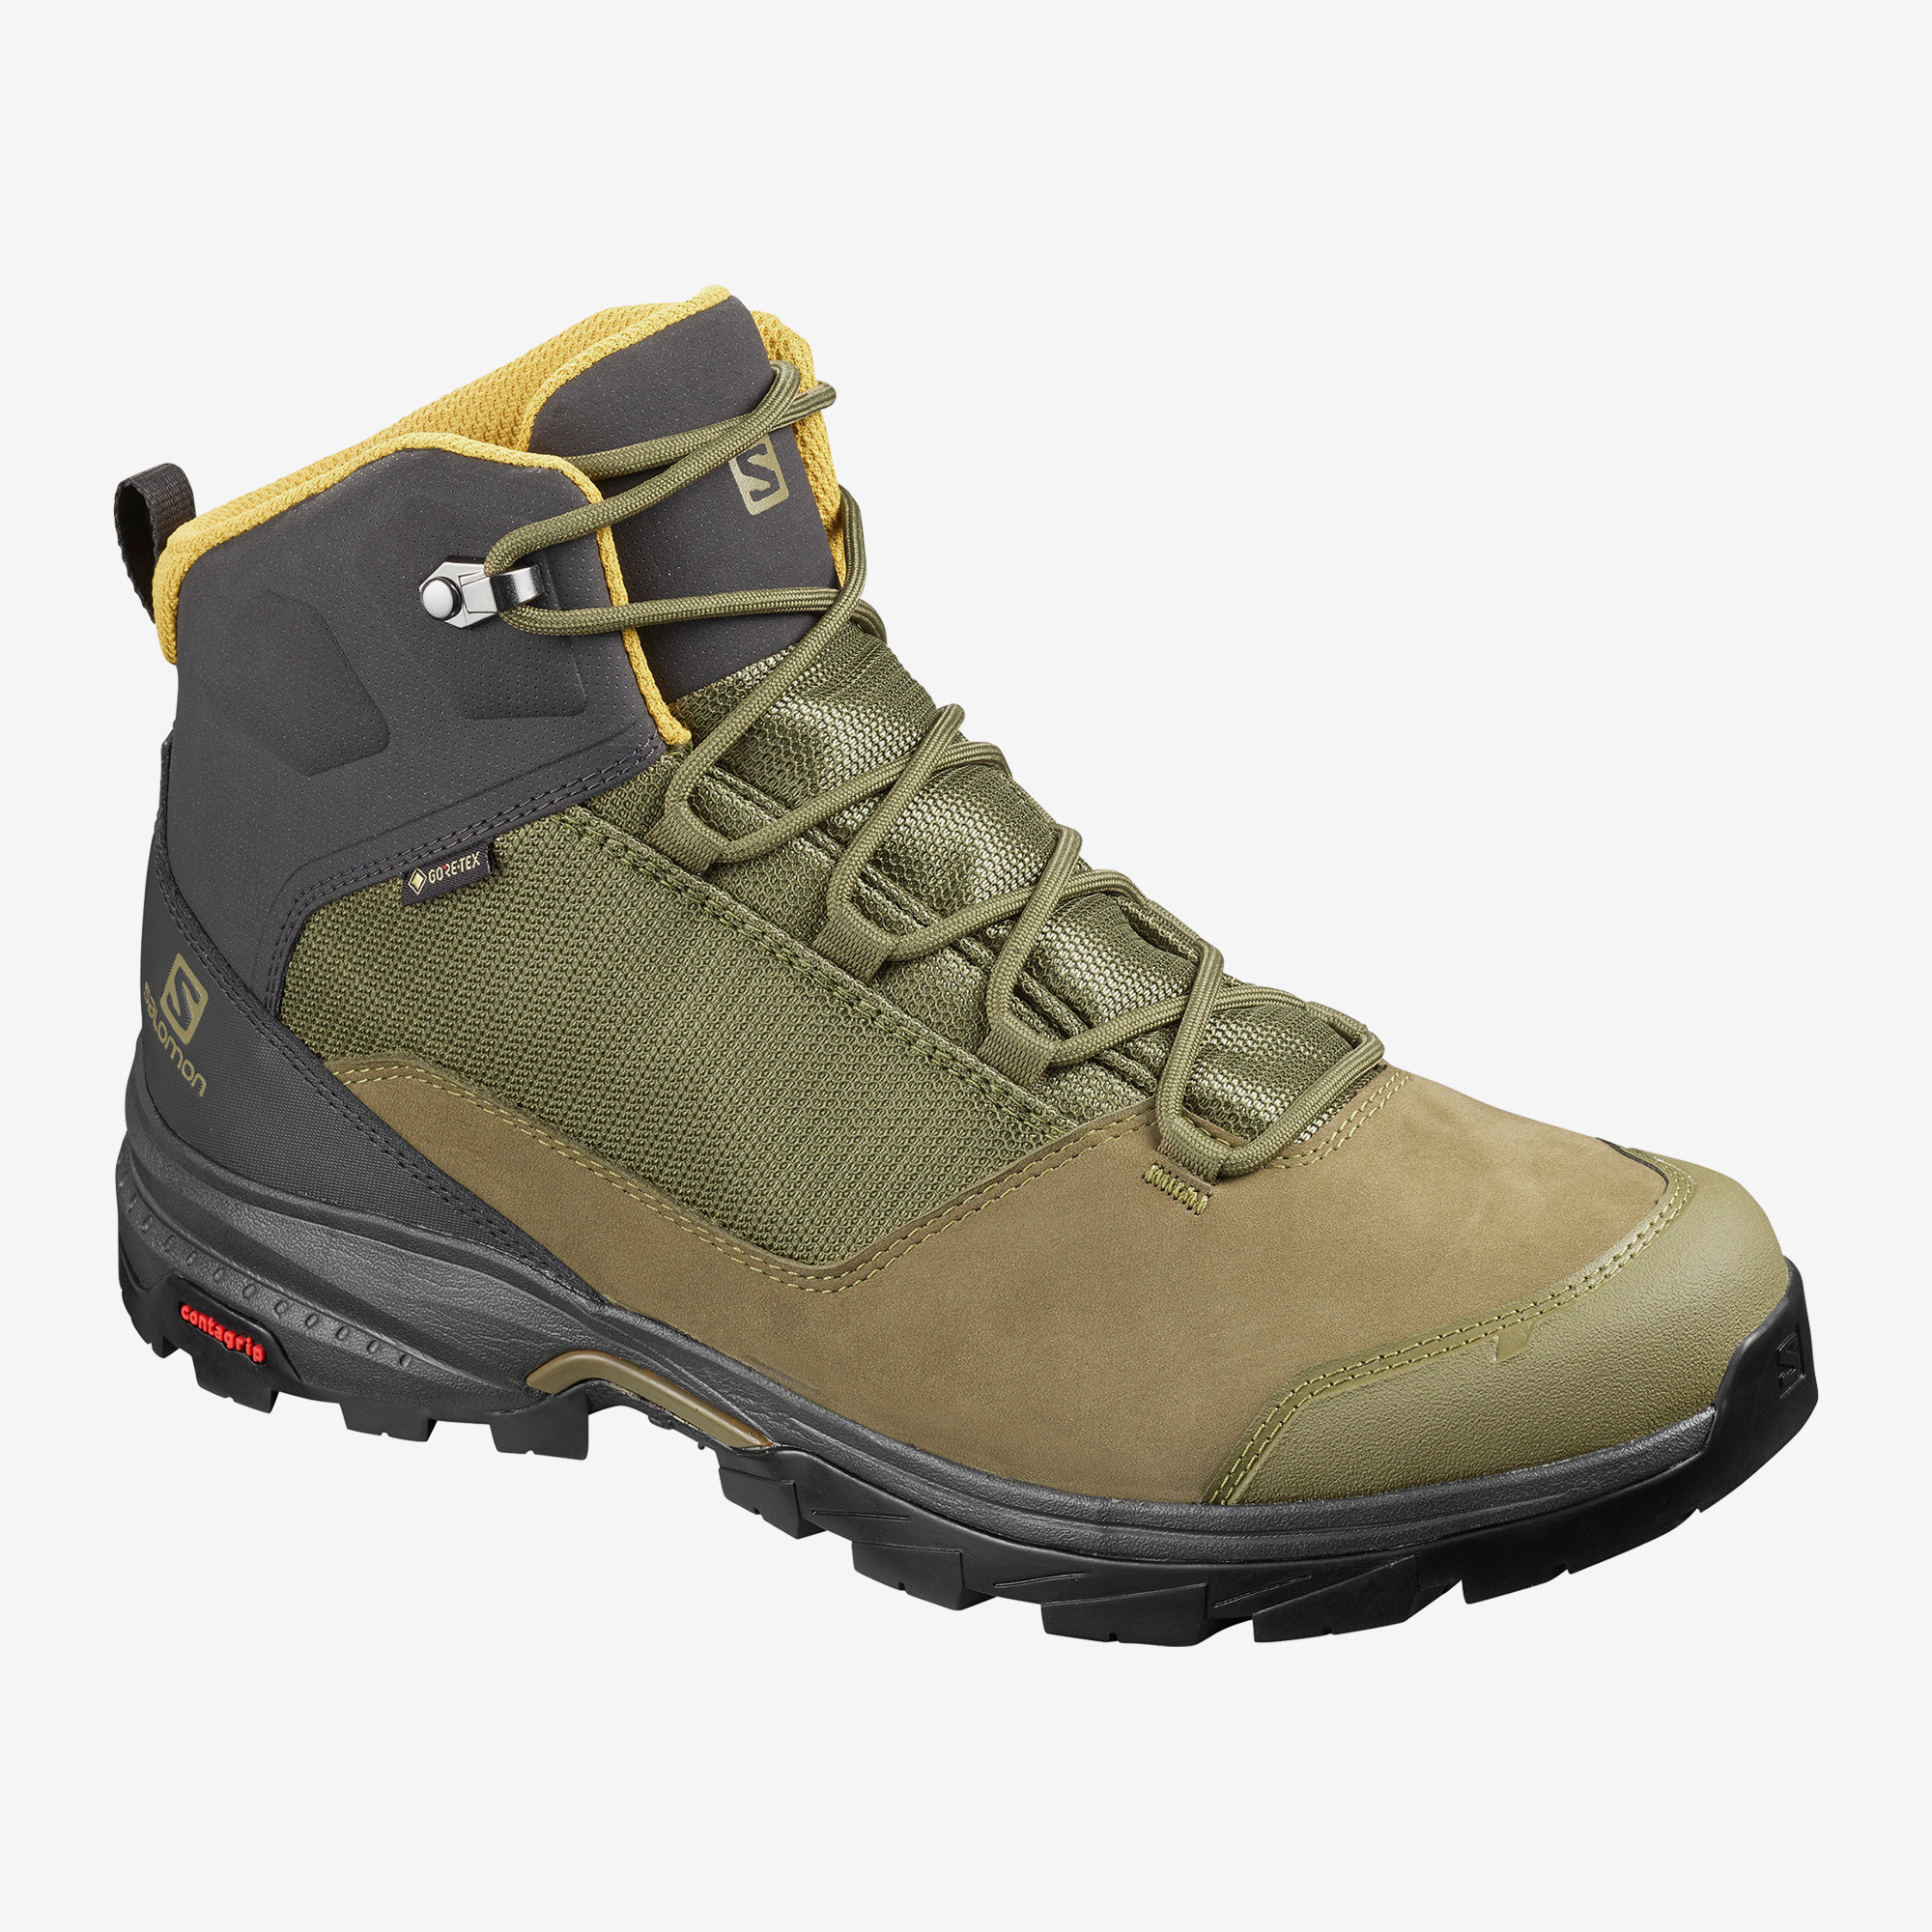 boots for backpacking